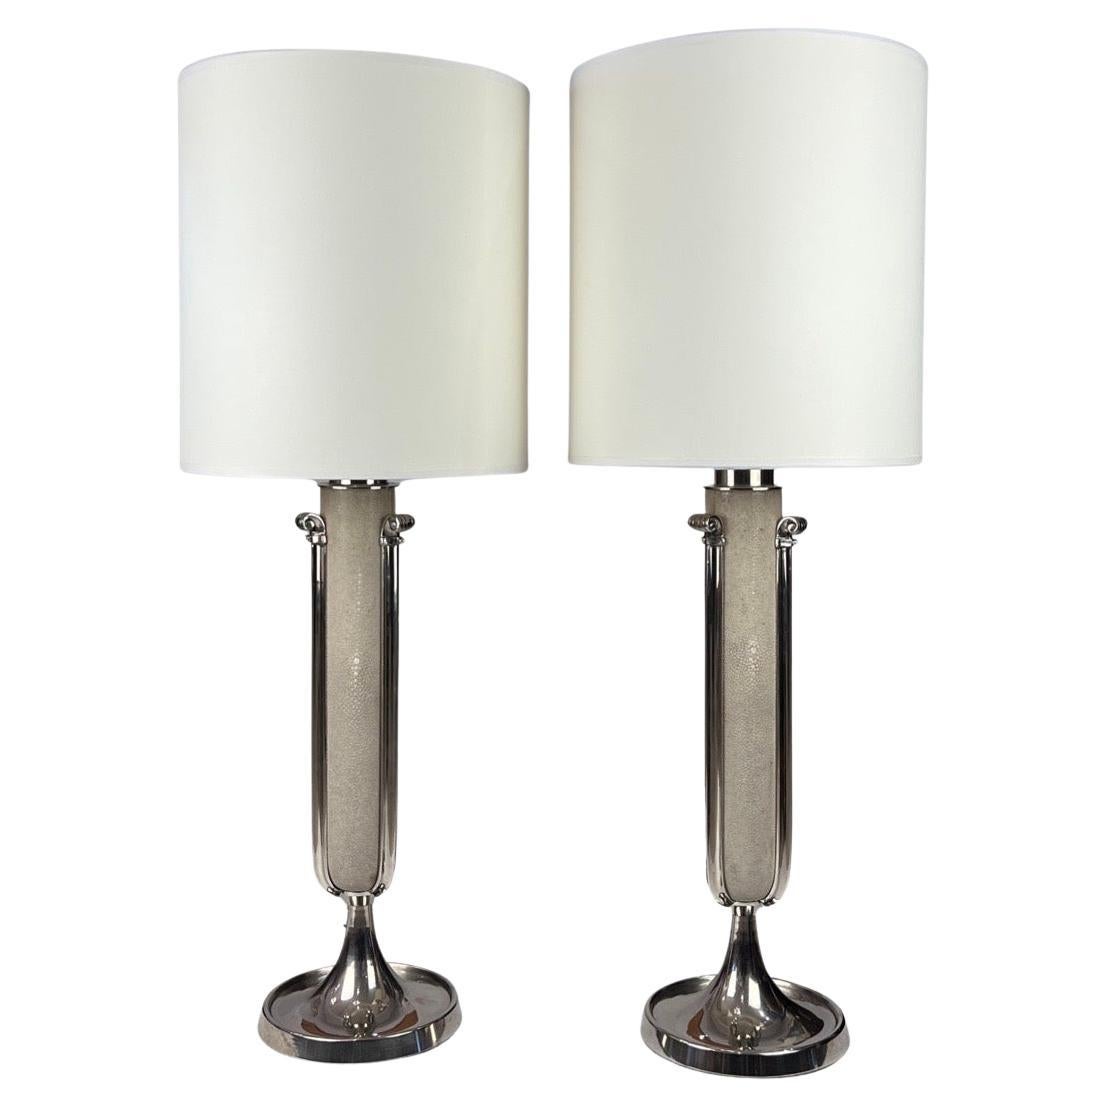 Pair of Art Deco Table Lamps in Galuchat by Galey Freres